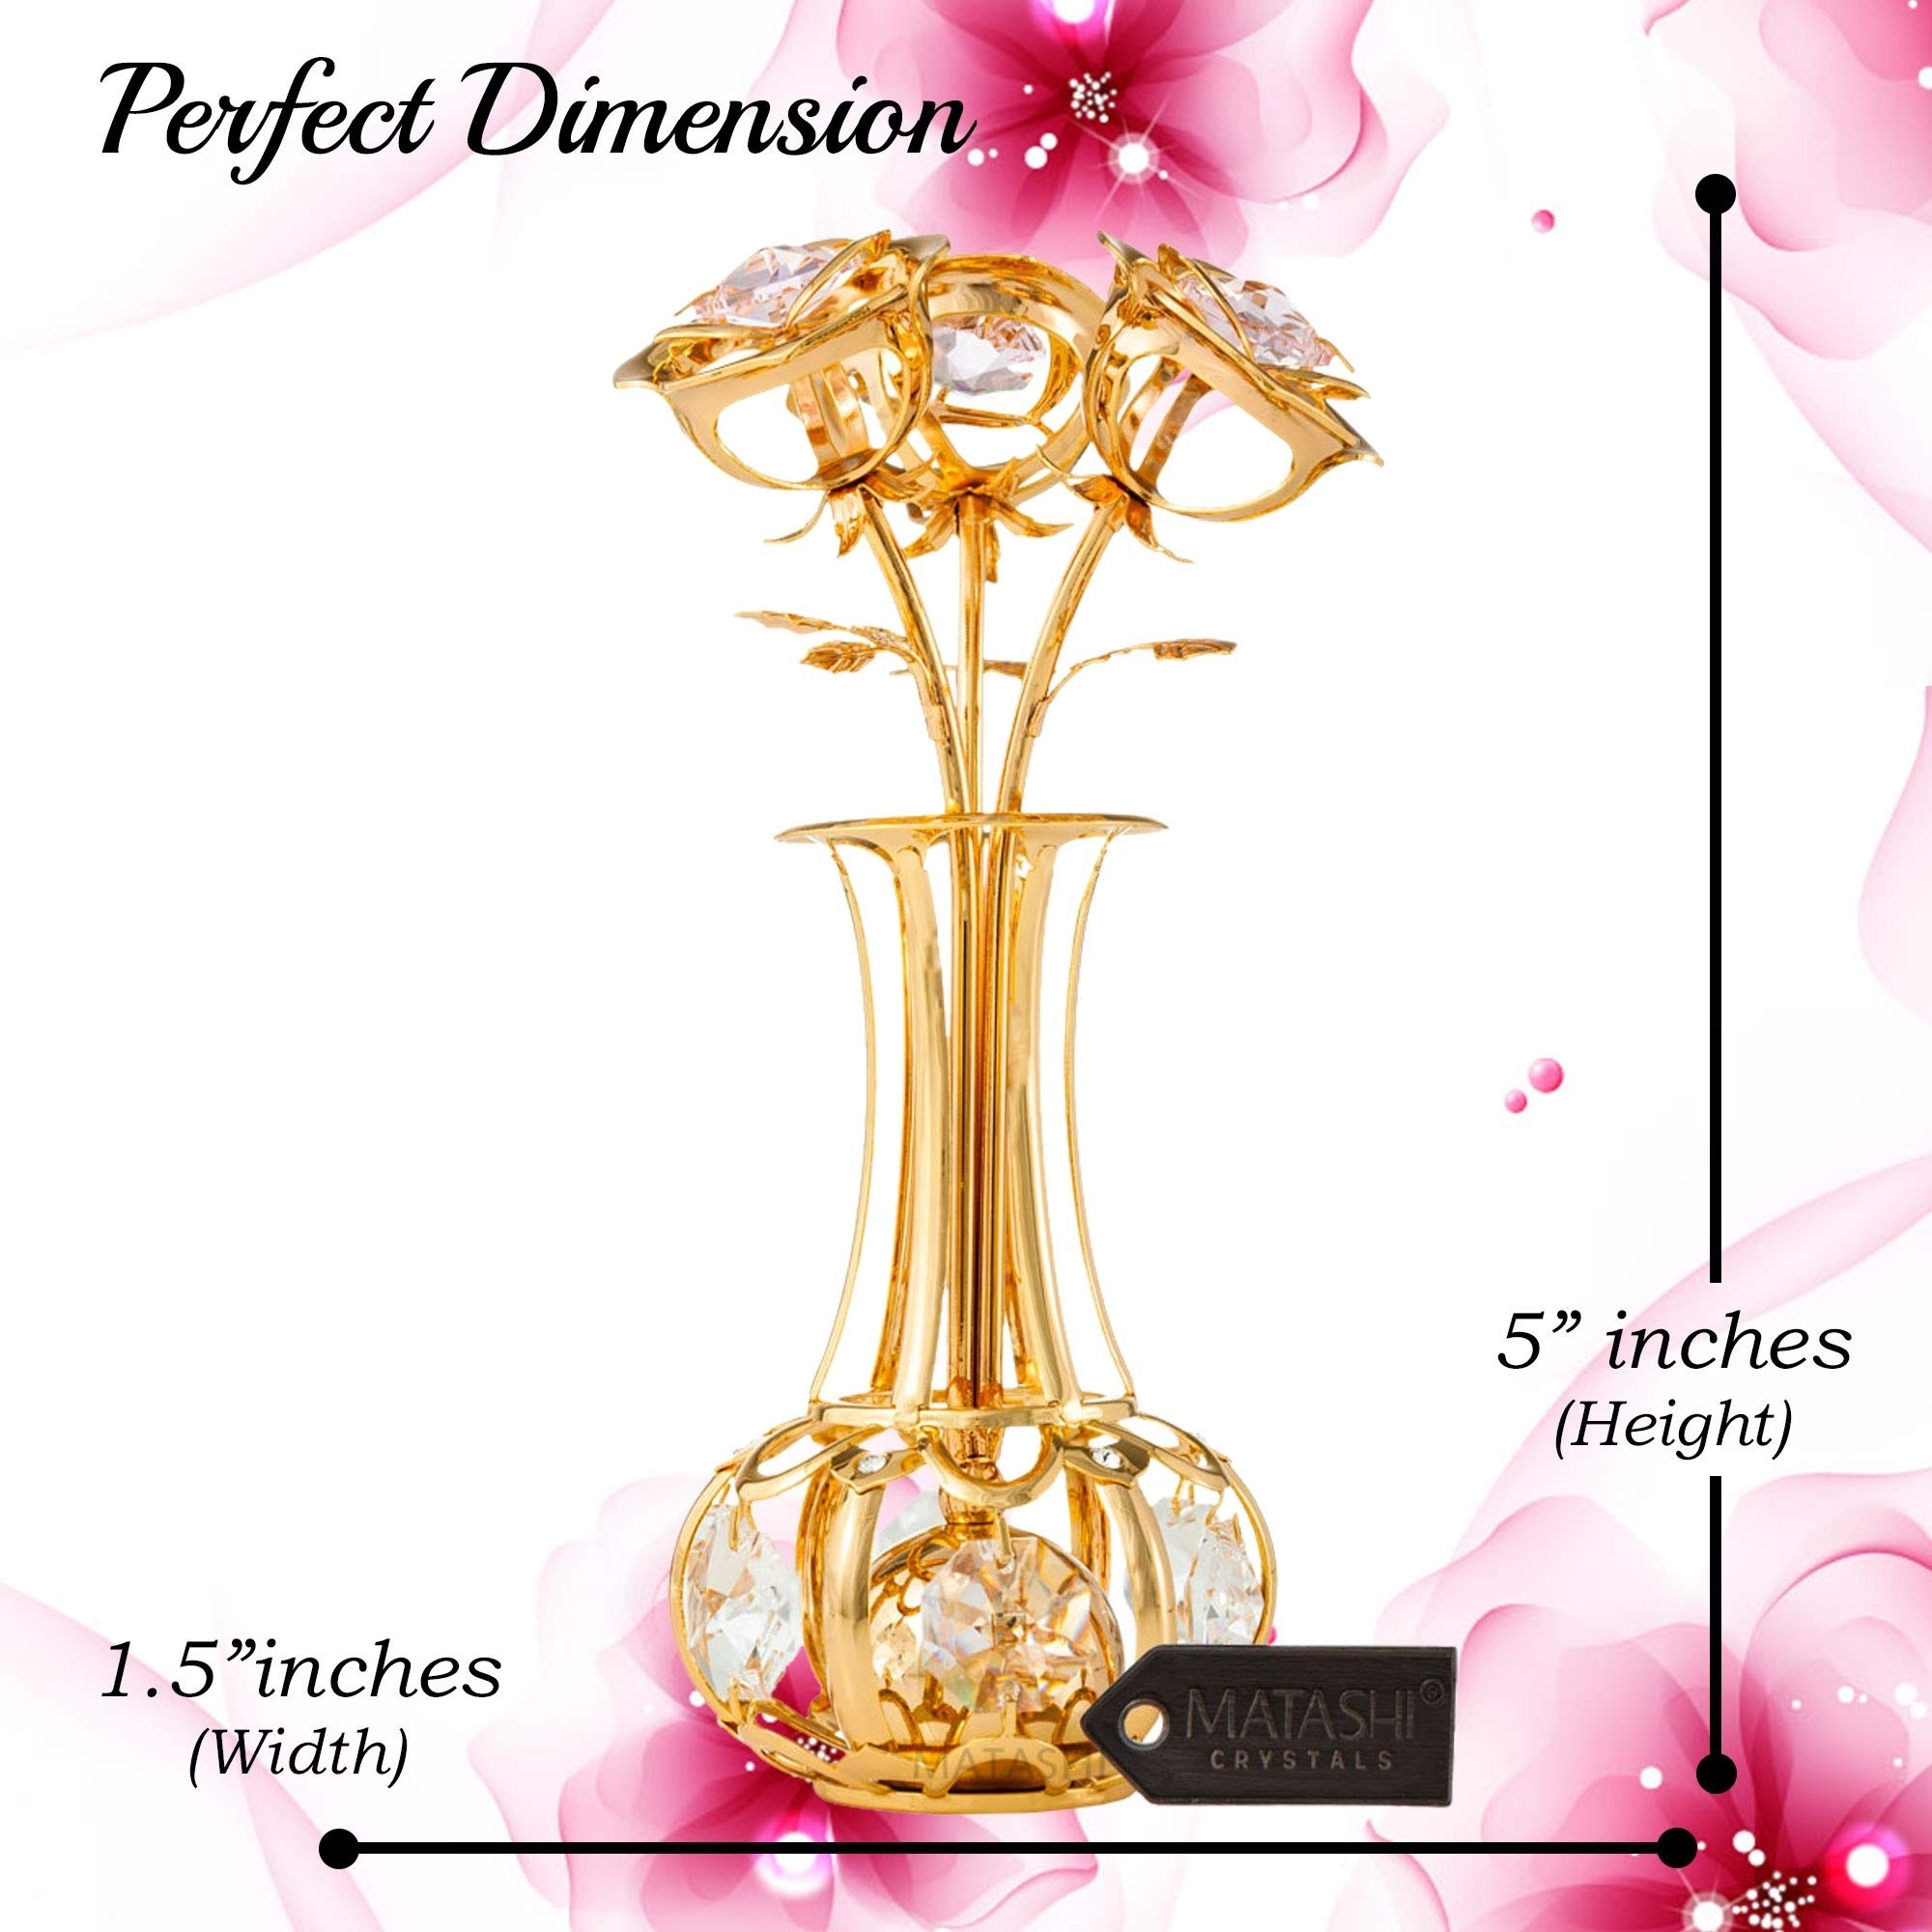 Matashi 24k Gold Plated Flowers Bouquet And Vase W/ Pink & Clear Crystals , 24k Gold-Plated Table Top Decorations , Metal Floral Arrangement